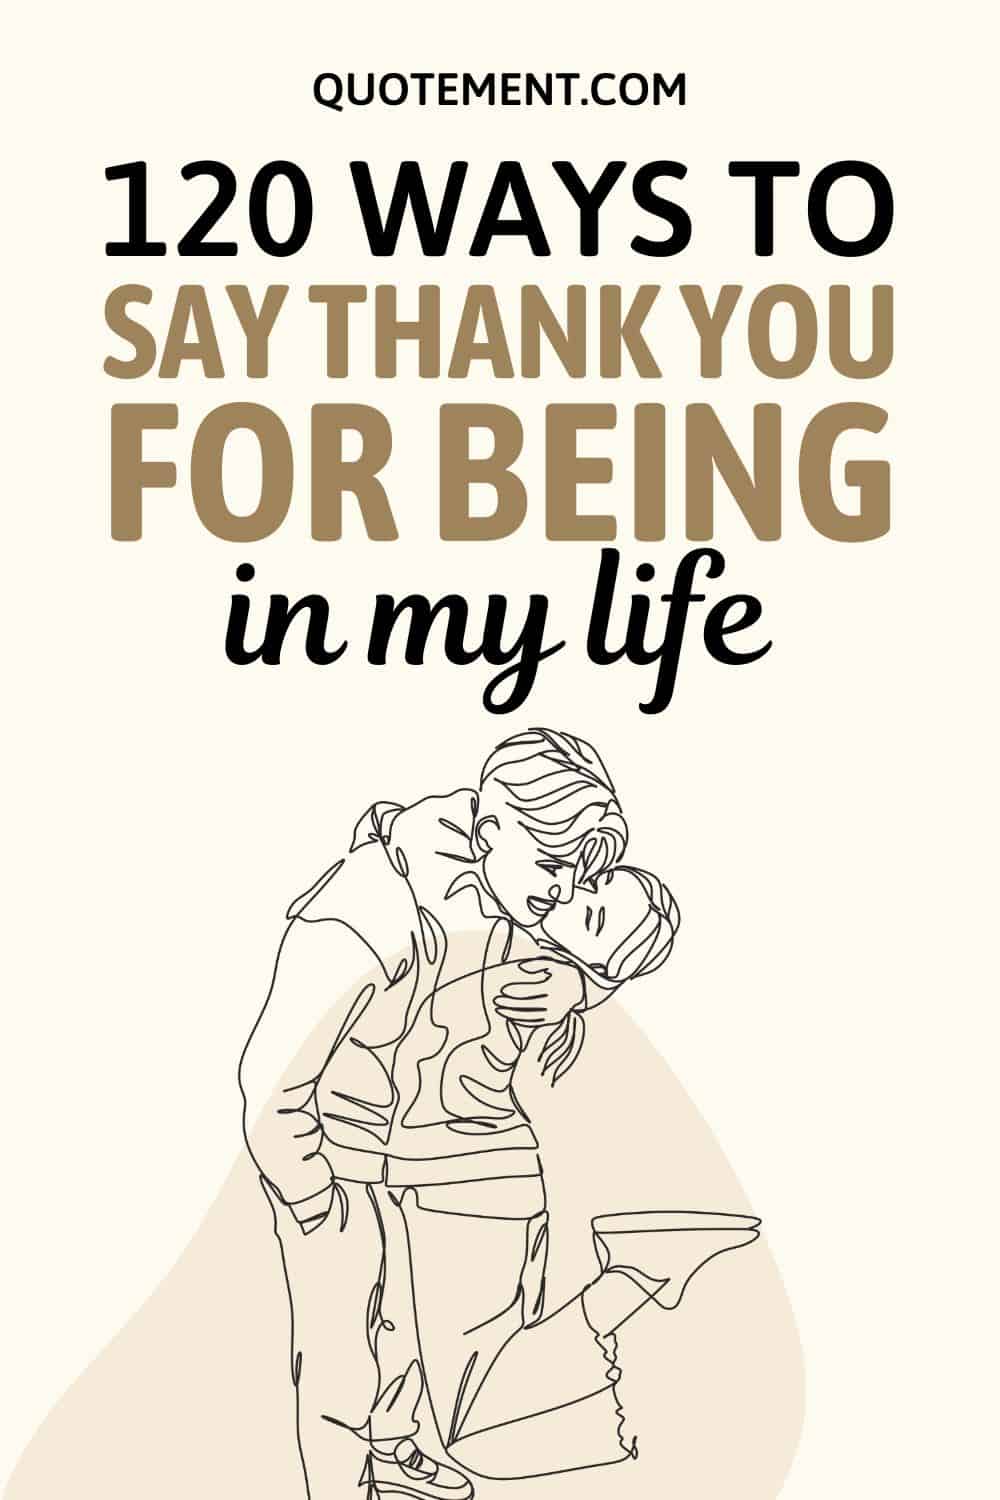 120 Unique Ways To Say Thank You For Being In My Life